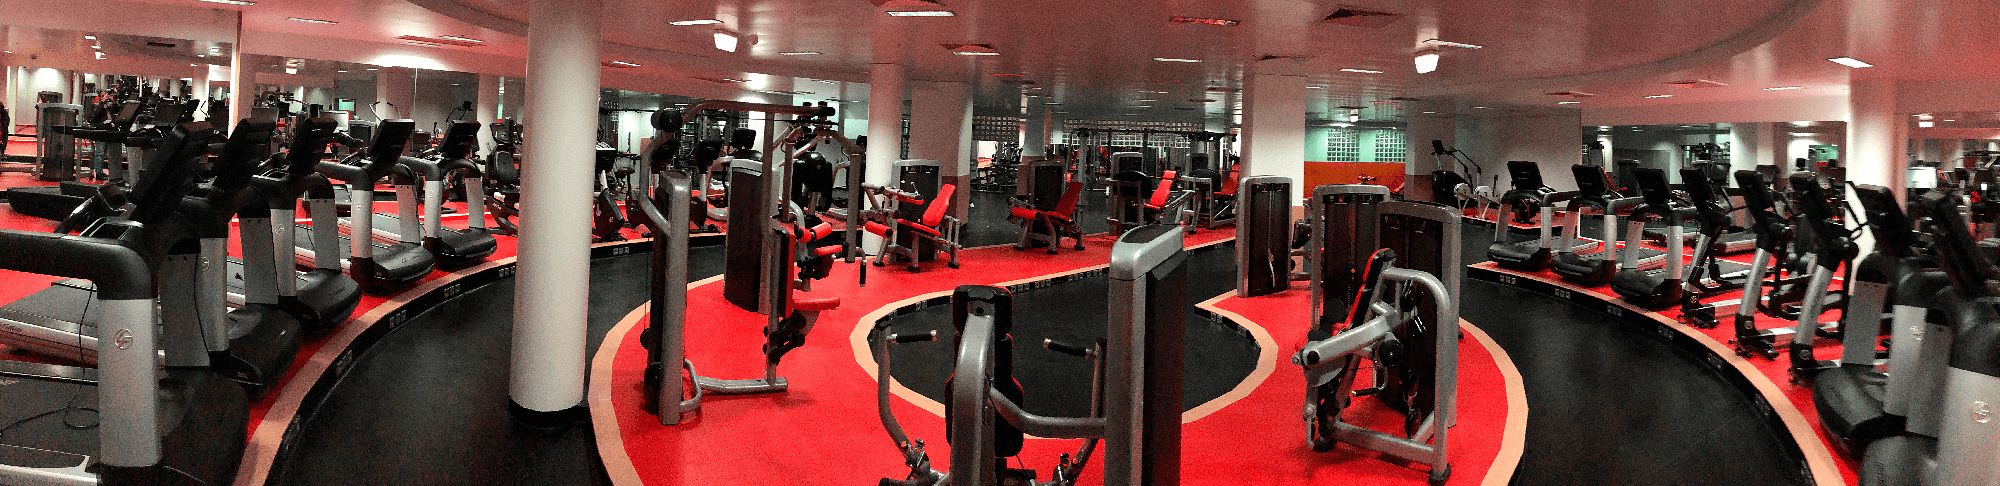 Be in Balance gym in Porto, Portugal